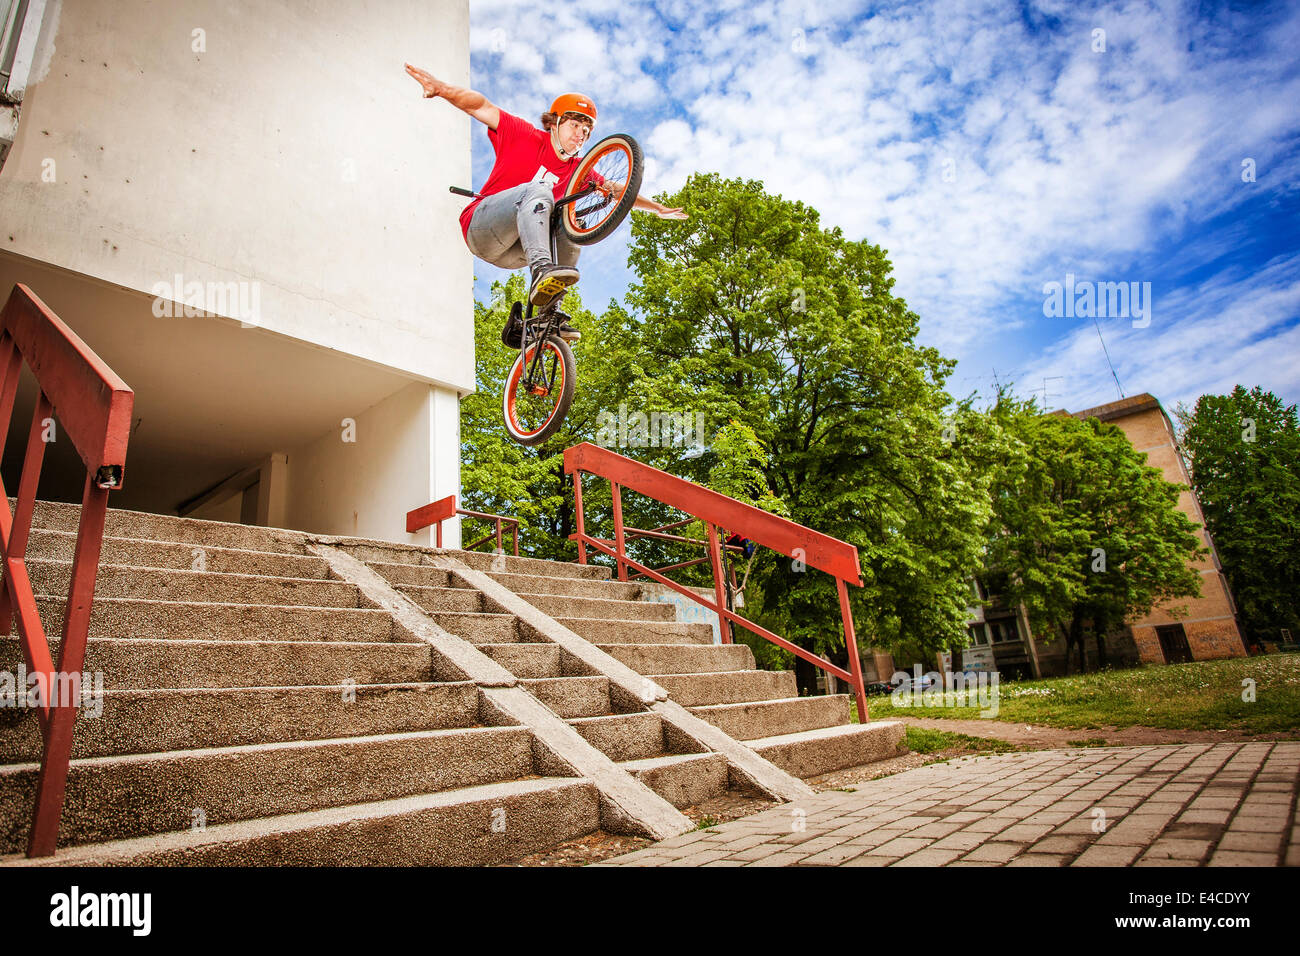 BMX biker performing a stunt over a staircase Stock Photo